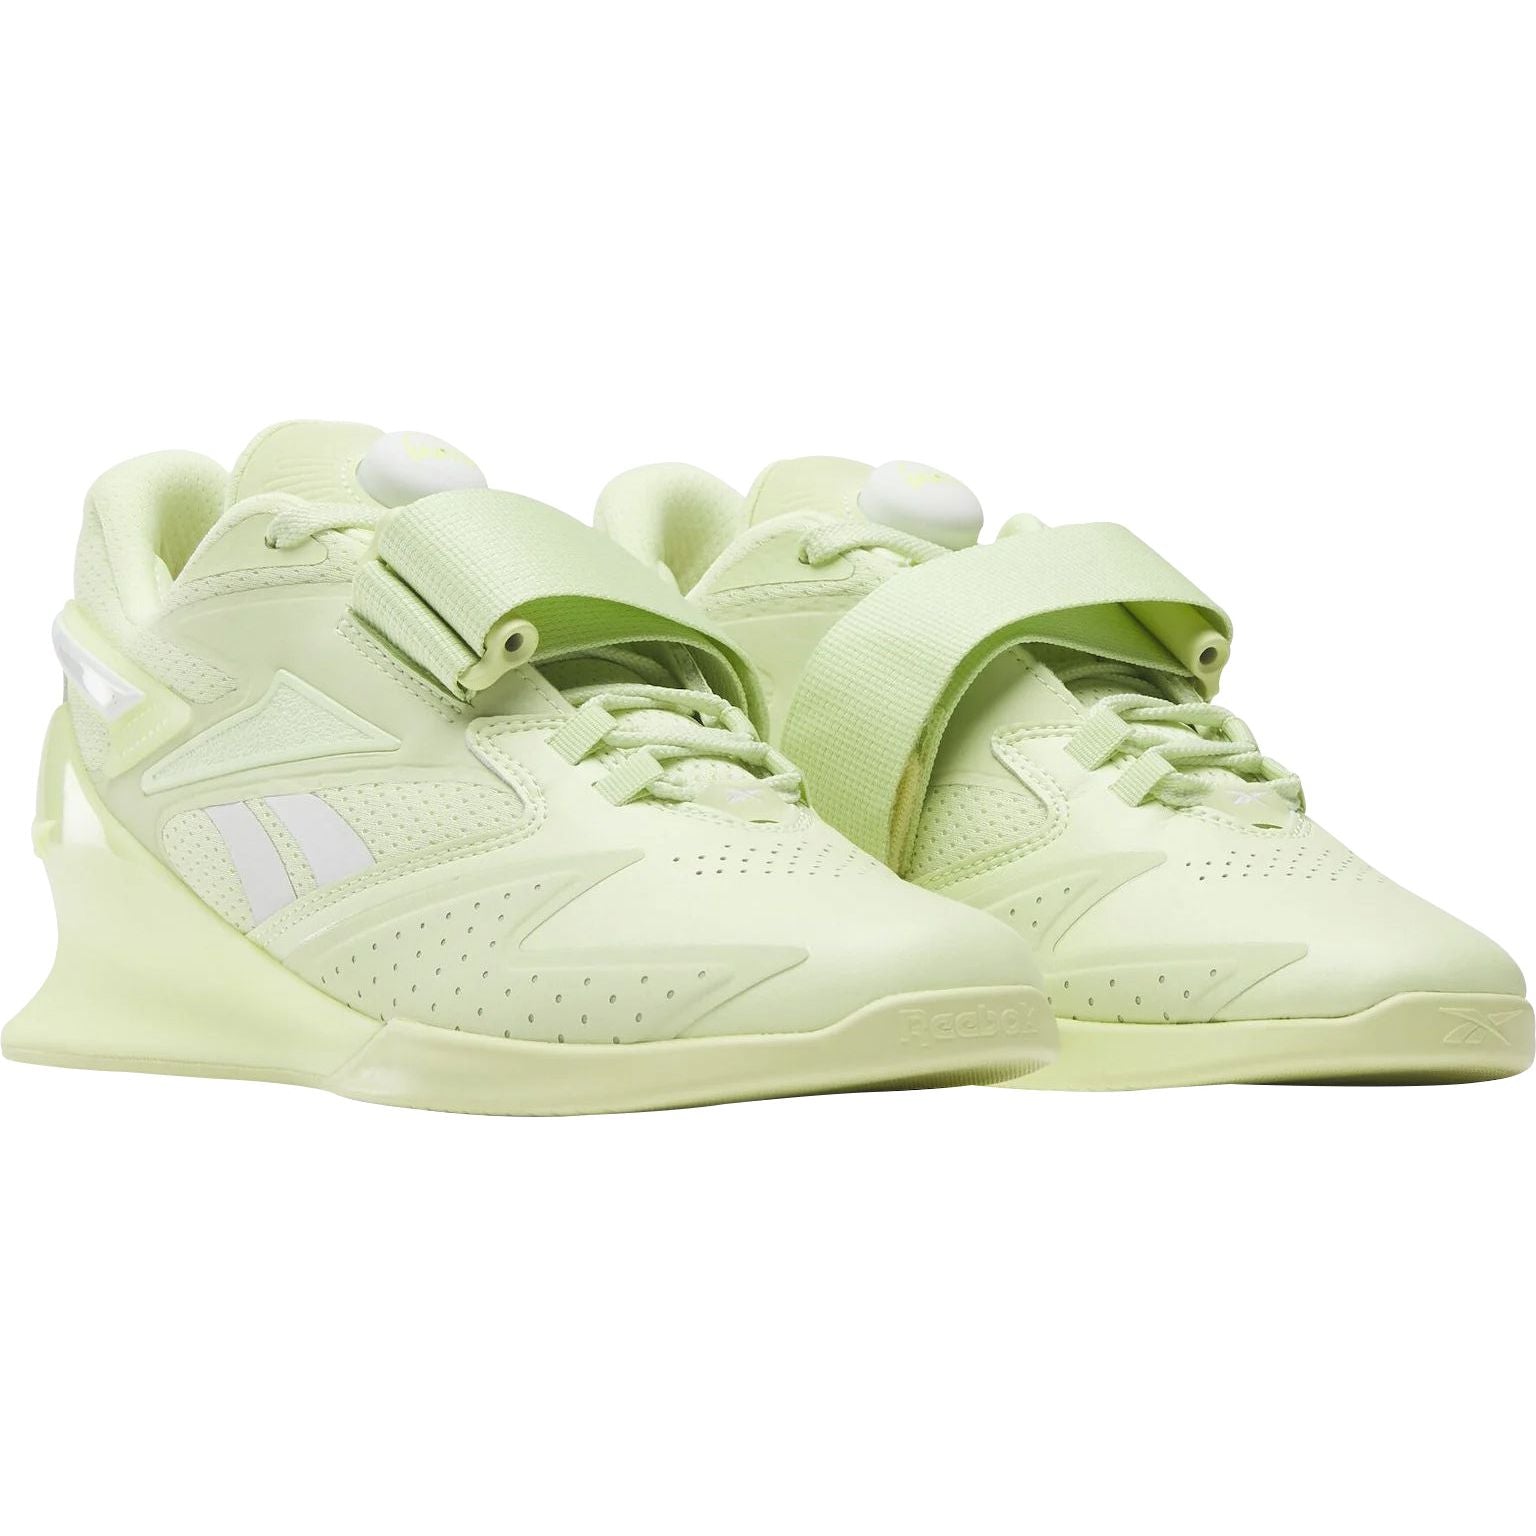 Reebok Legacy Lifter Iii Front - Front View